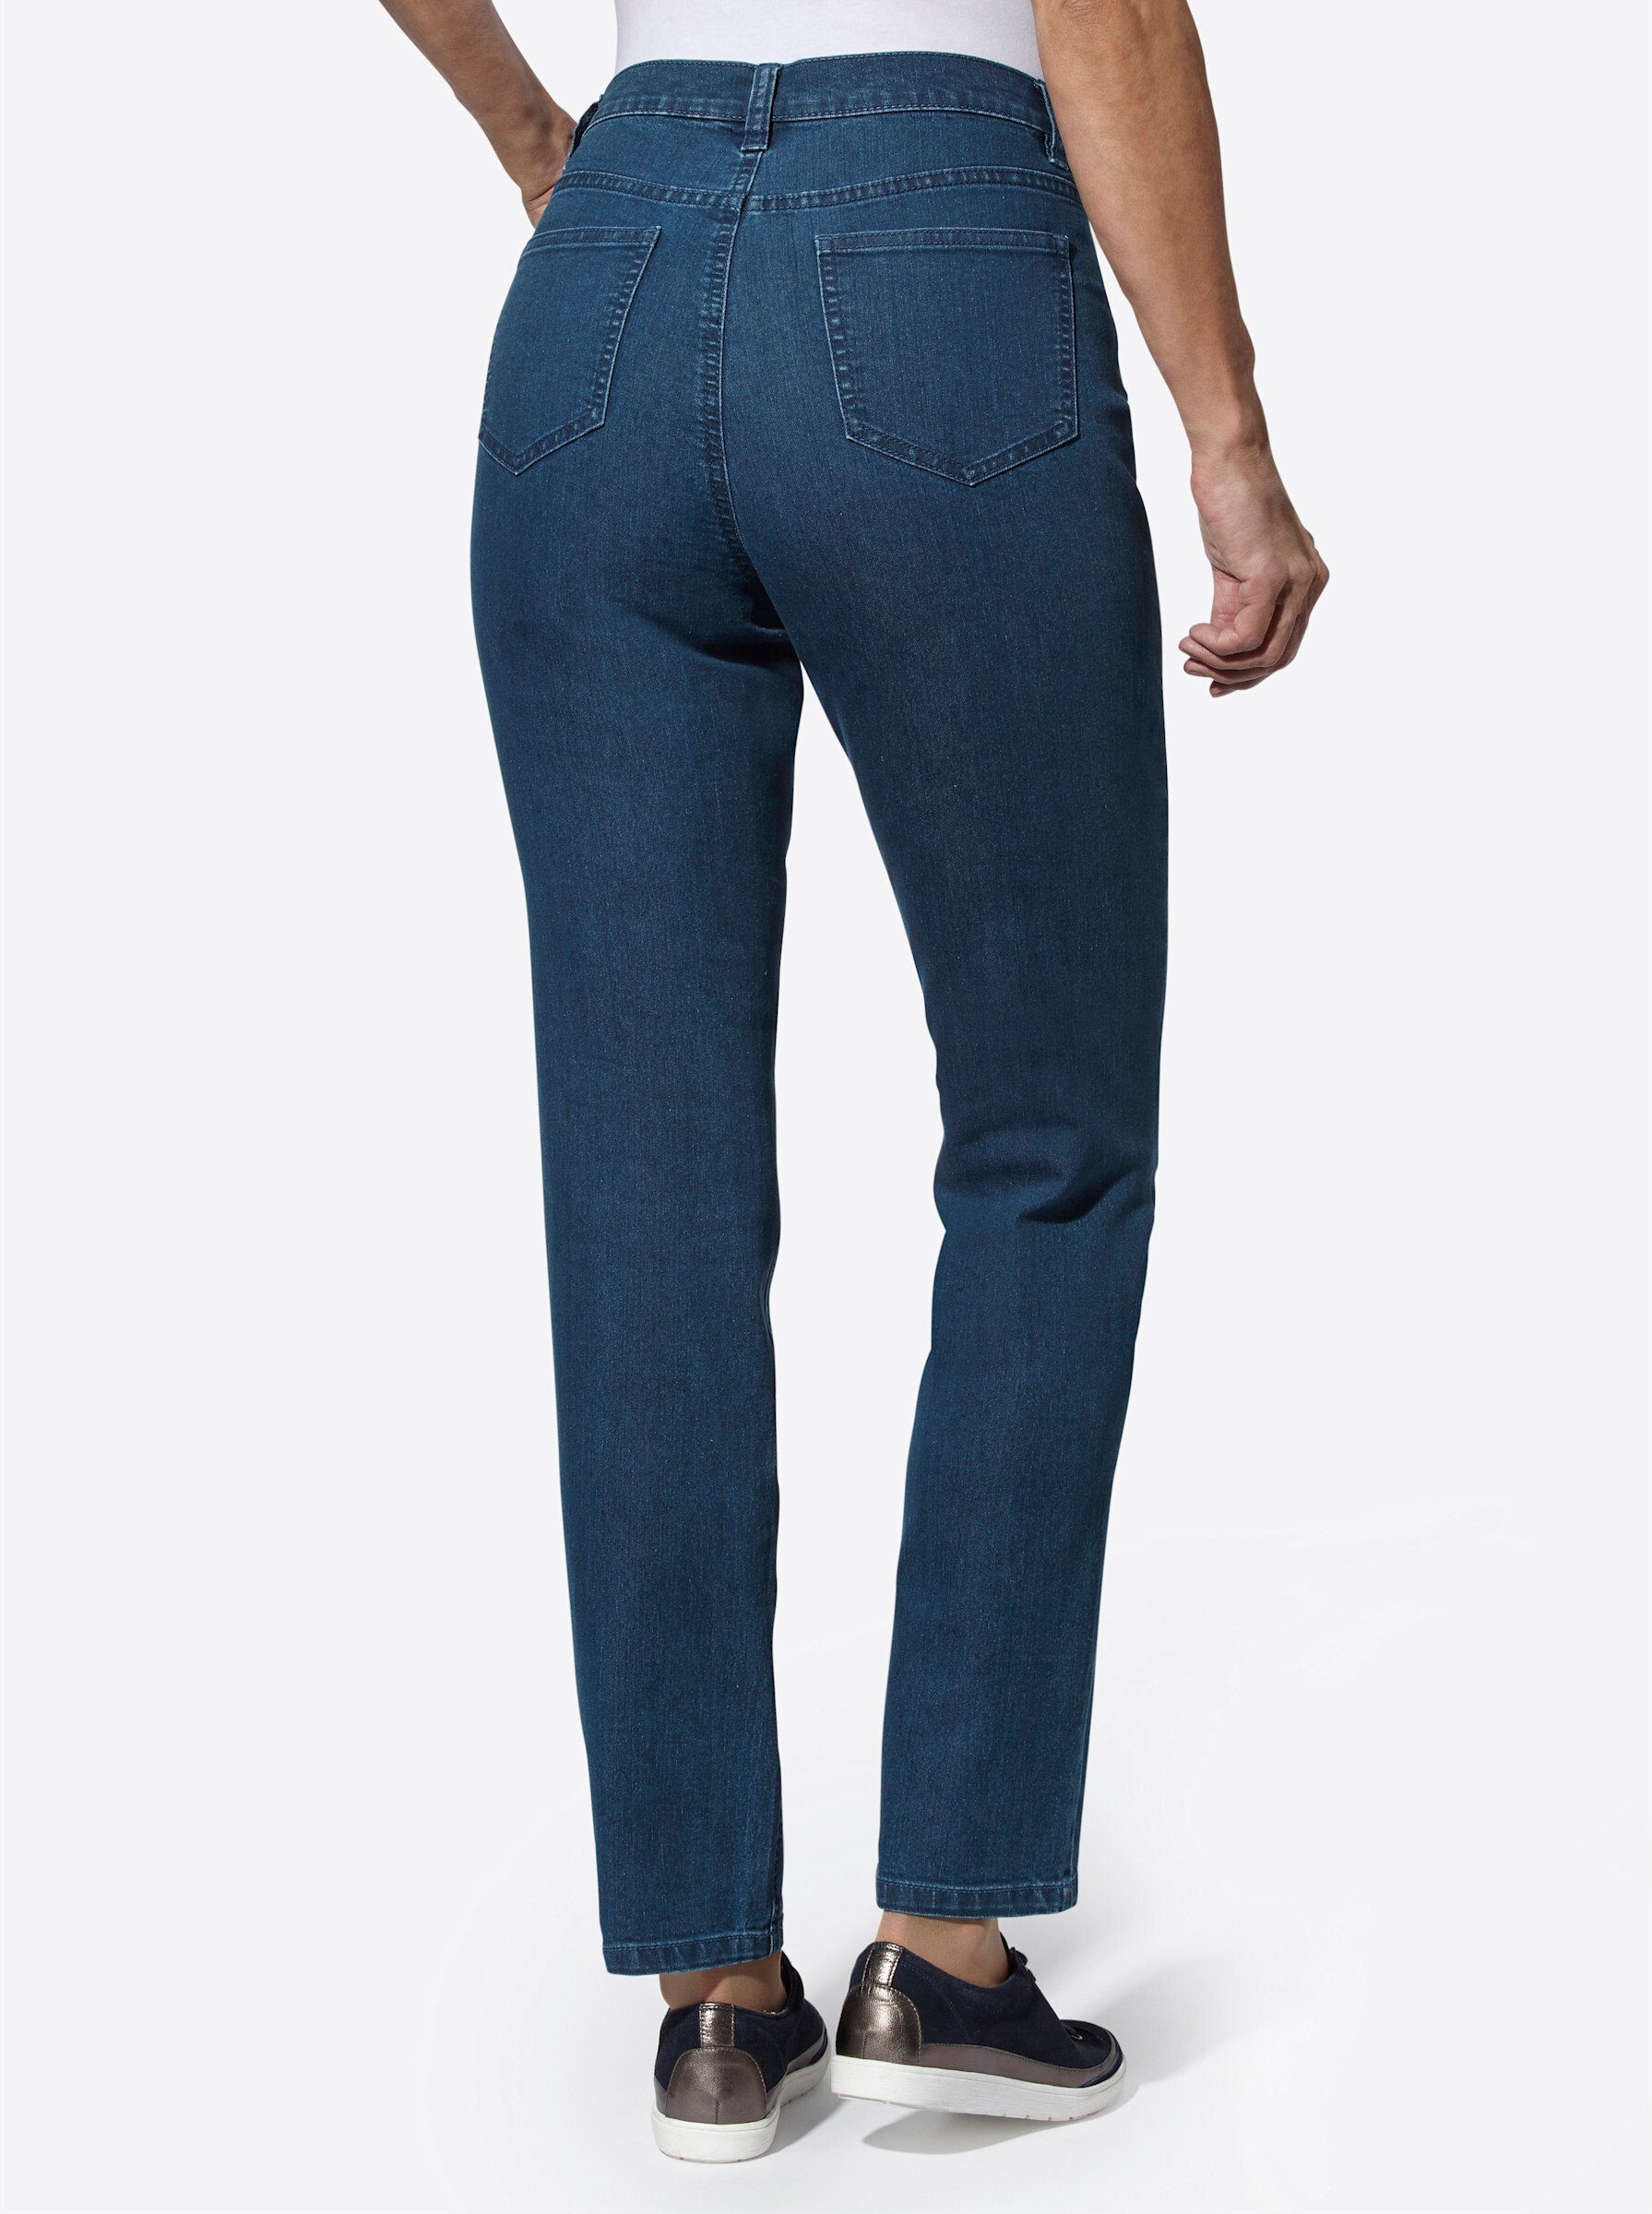 an! Bequeme Jeans blue-stone-washed Sieh